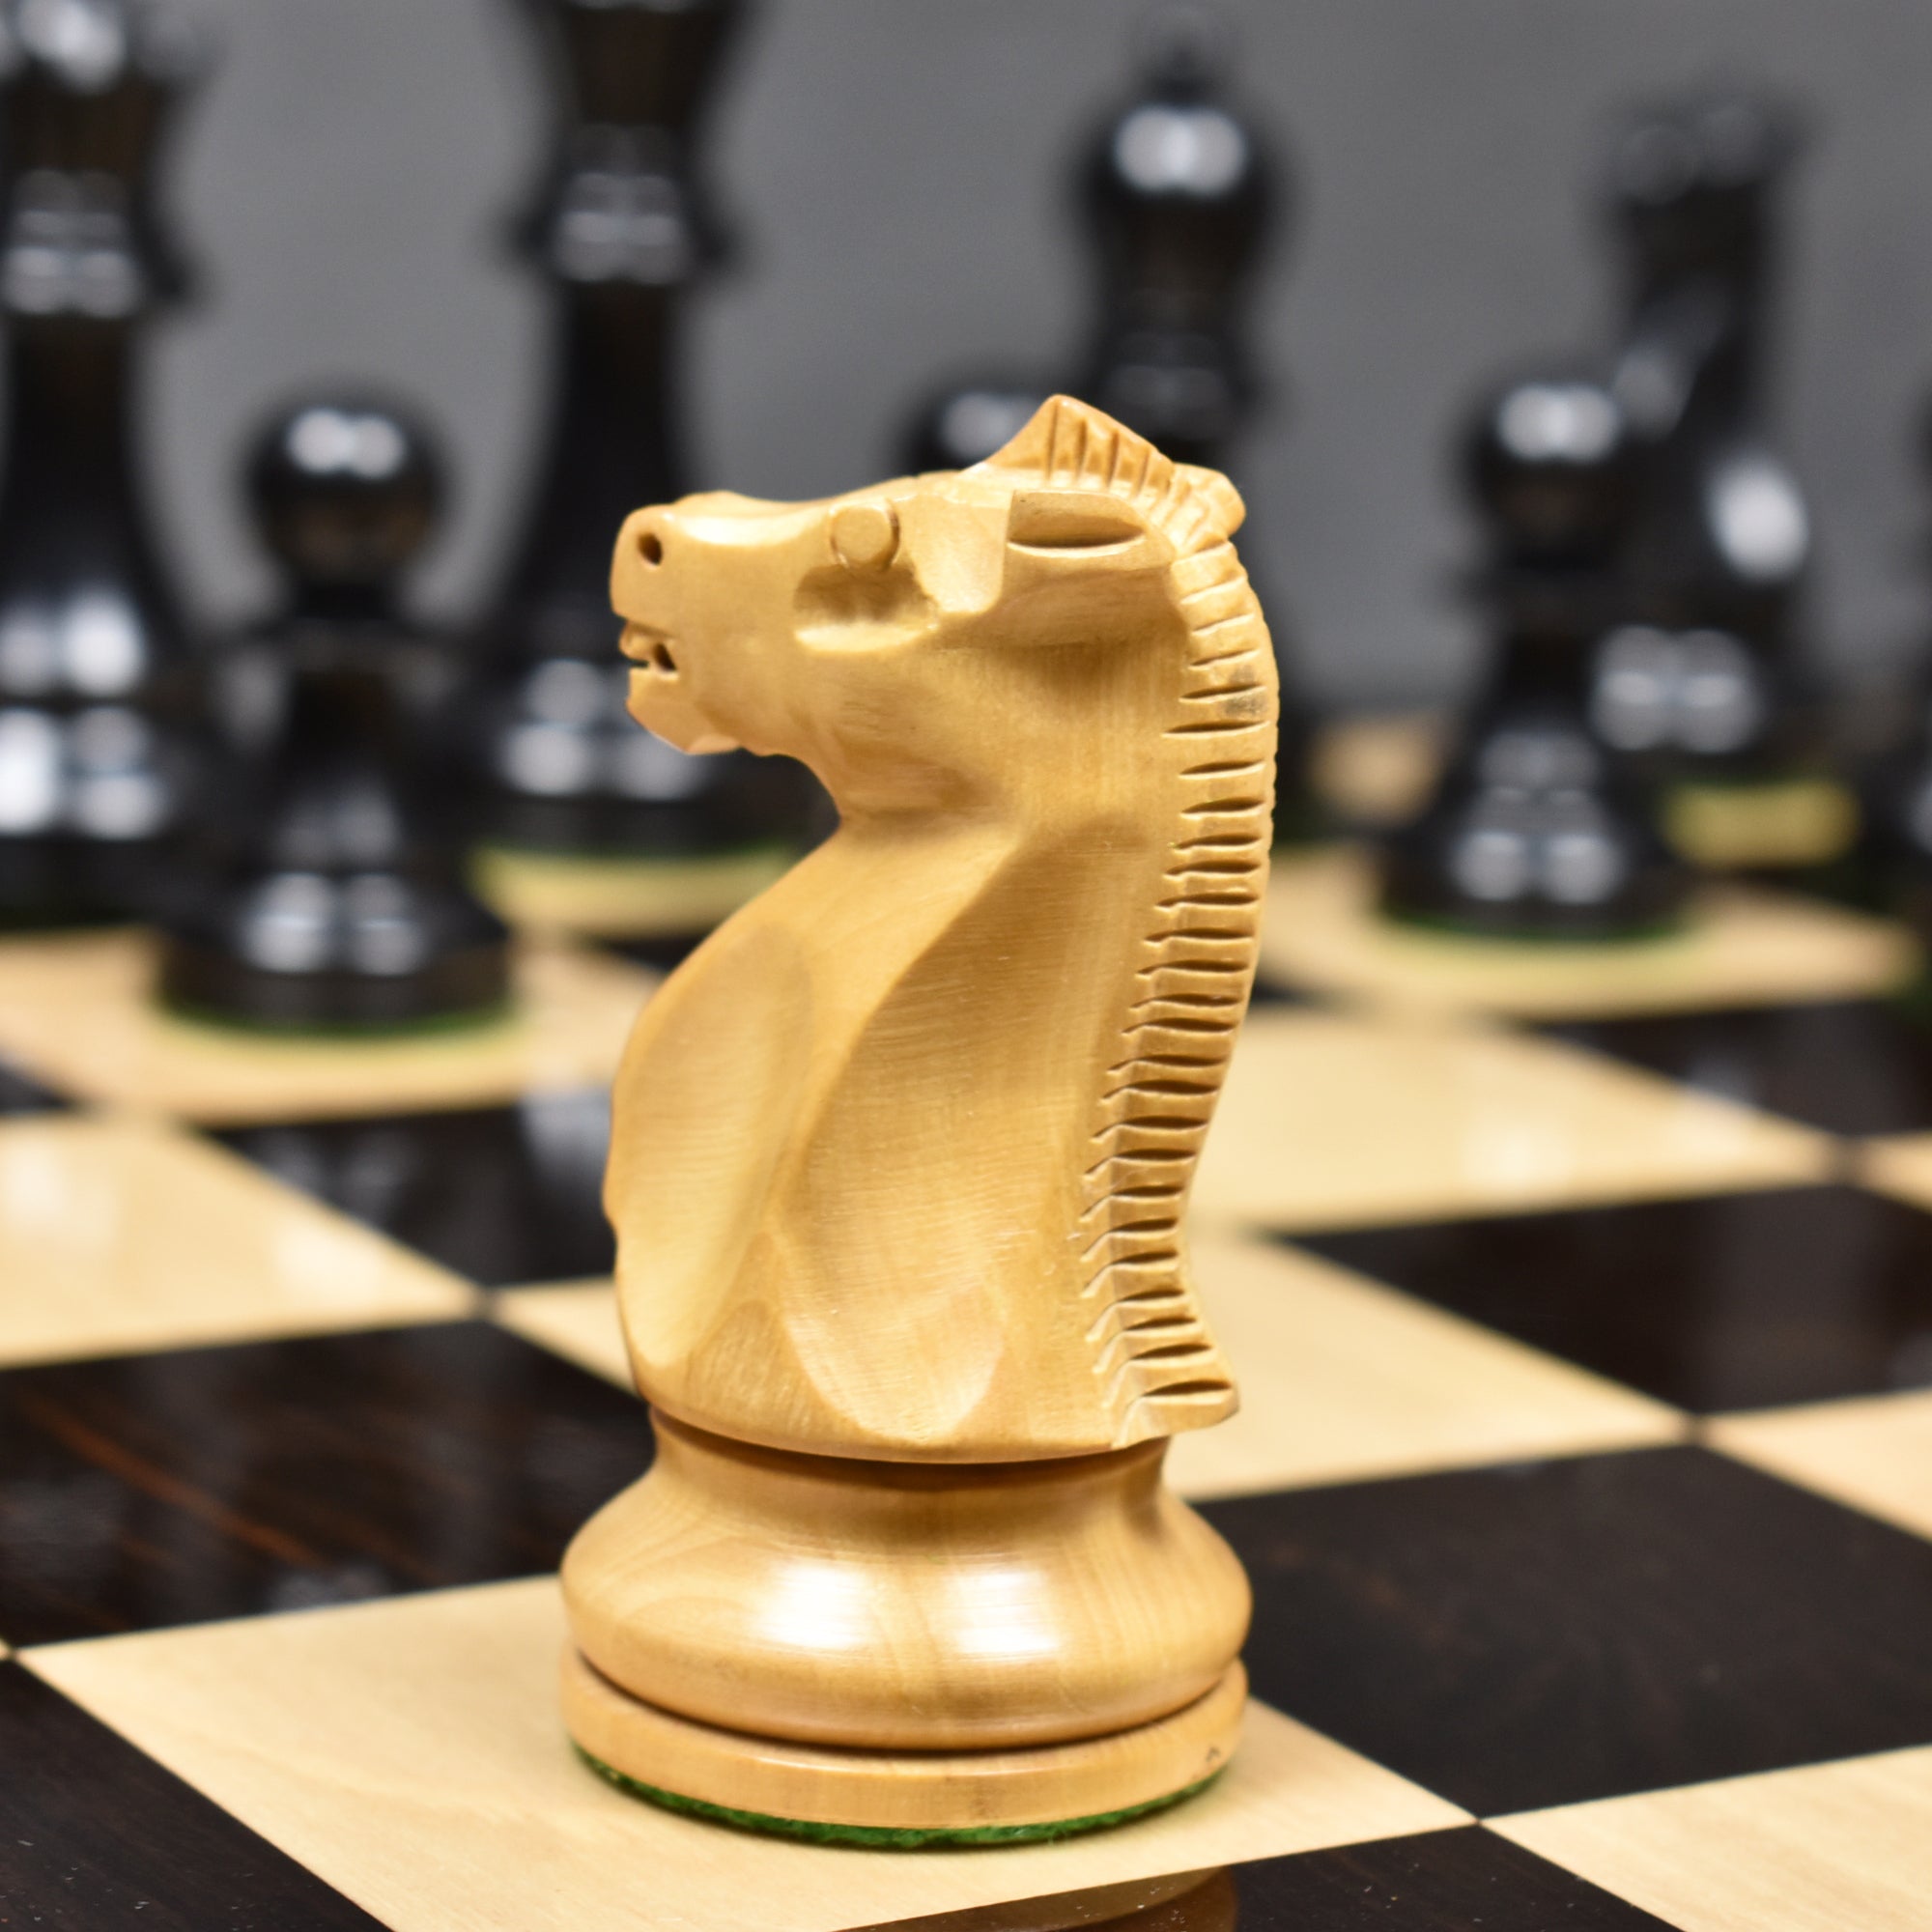 CHESS NEWS BLOG: : Fischer-Spassky chess set auctioned for  $67,000, Fischer letters for $10,000